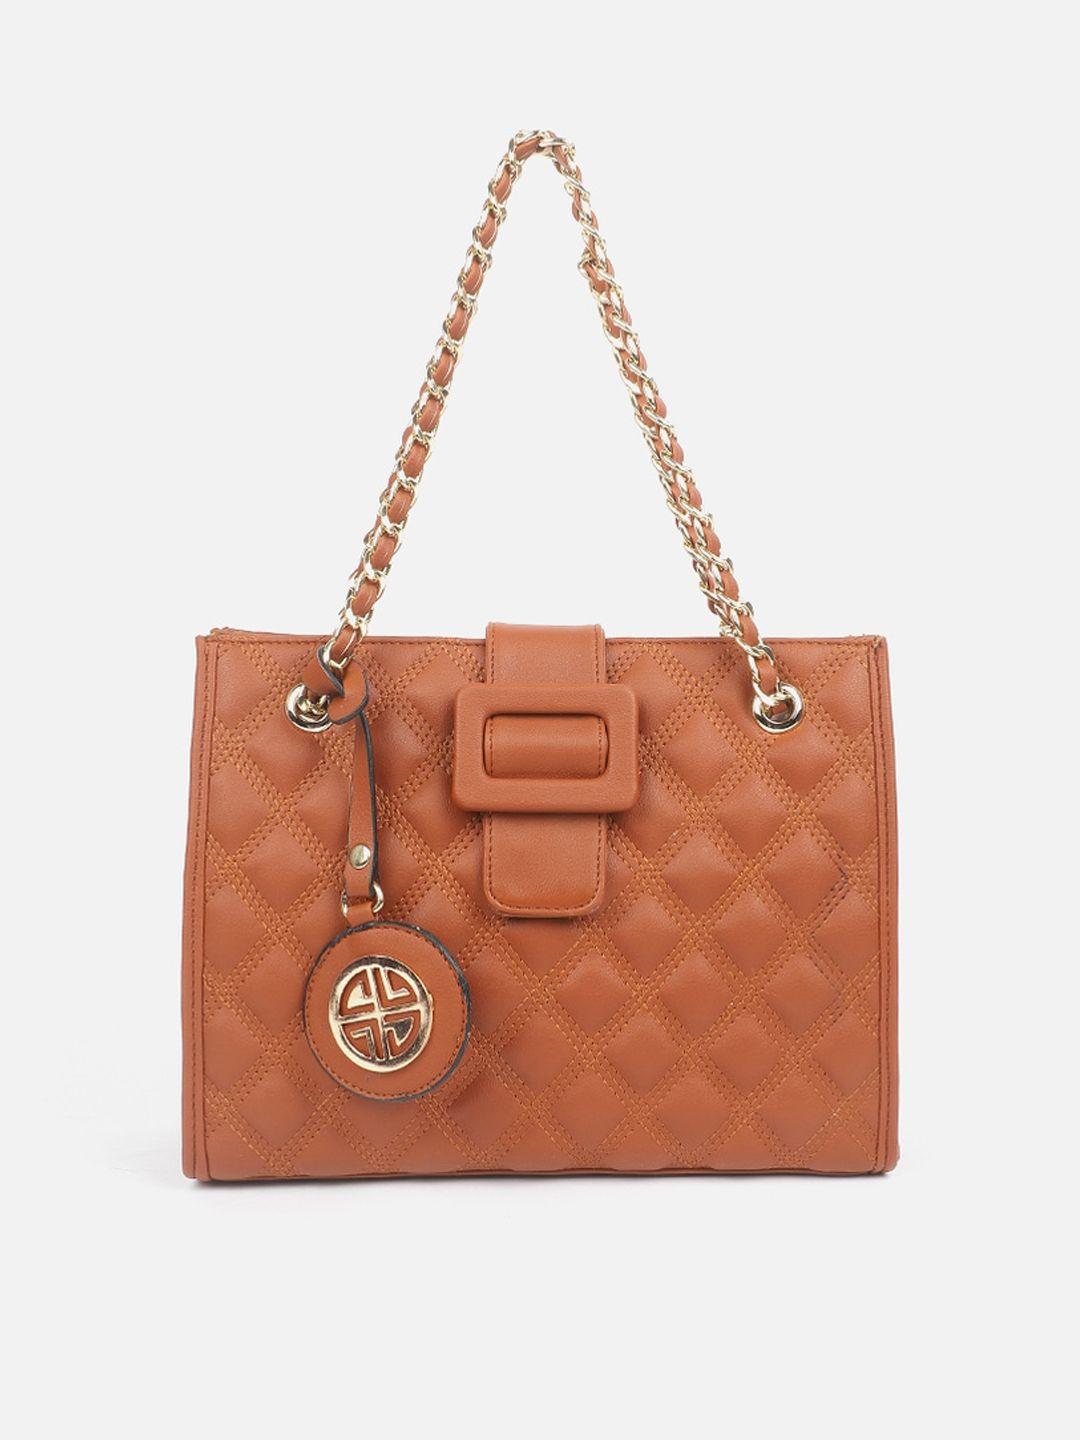 carlton london geometric textured structured quilted shoulder bag